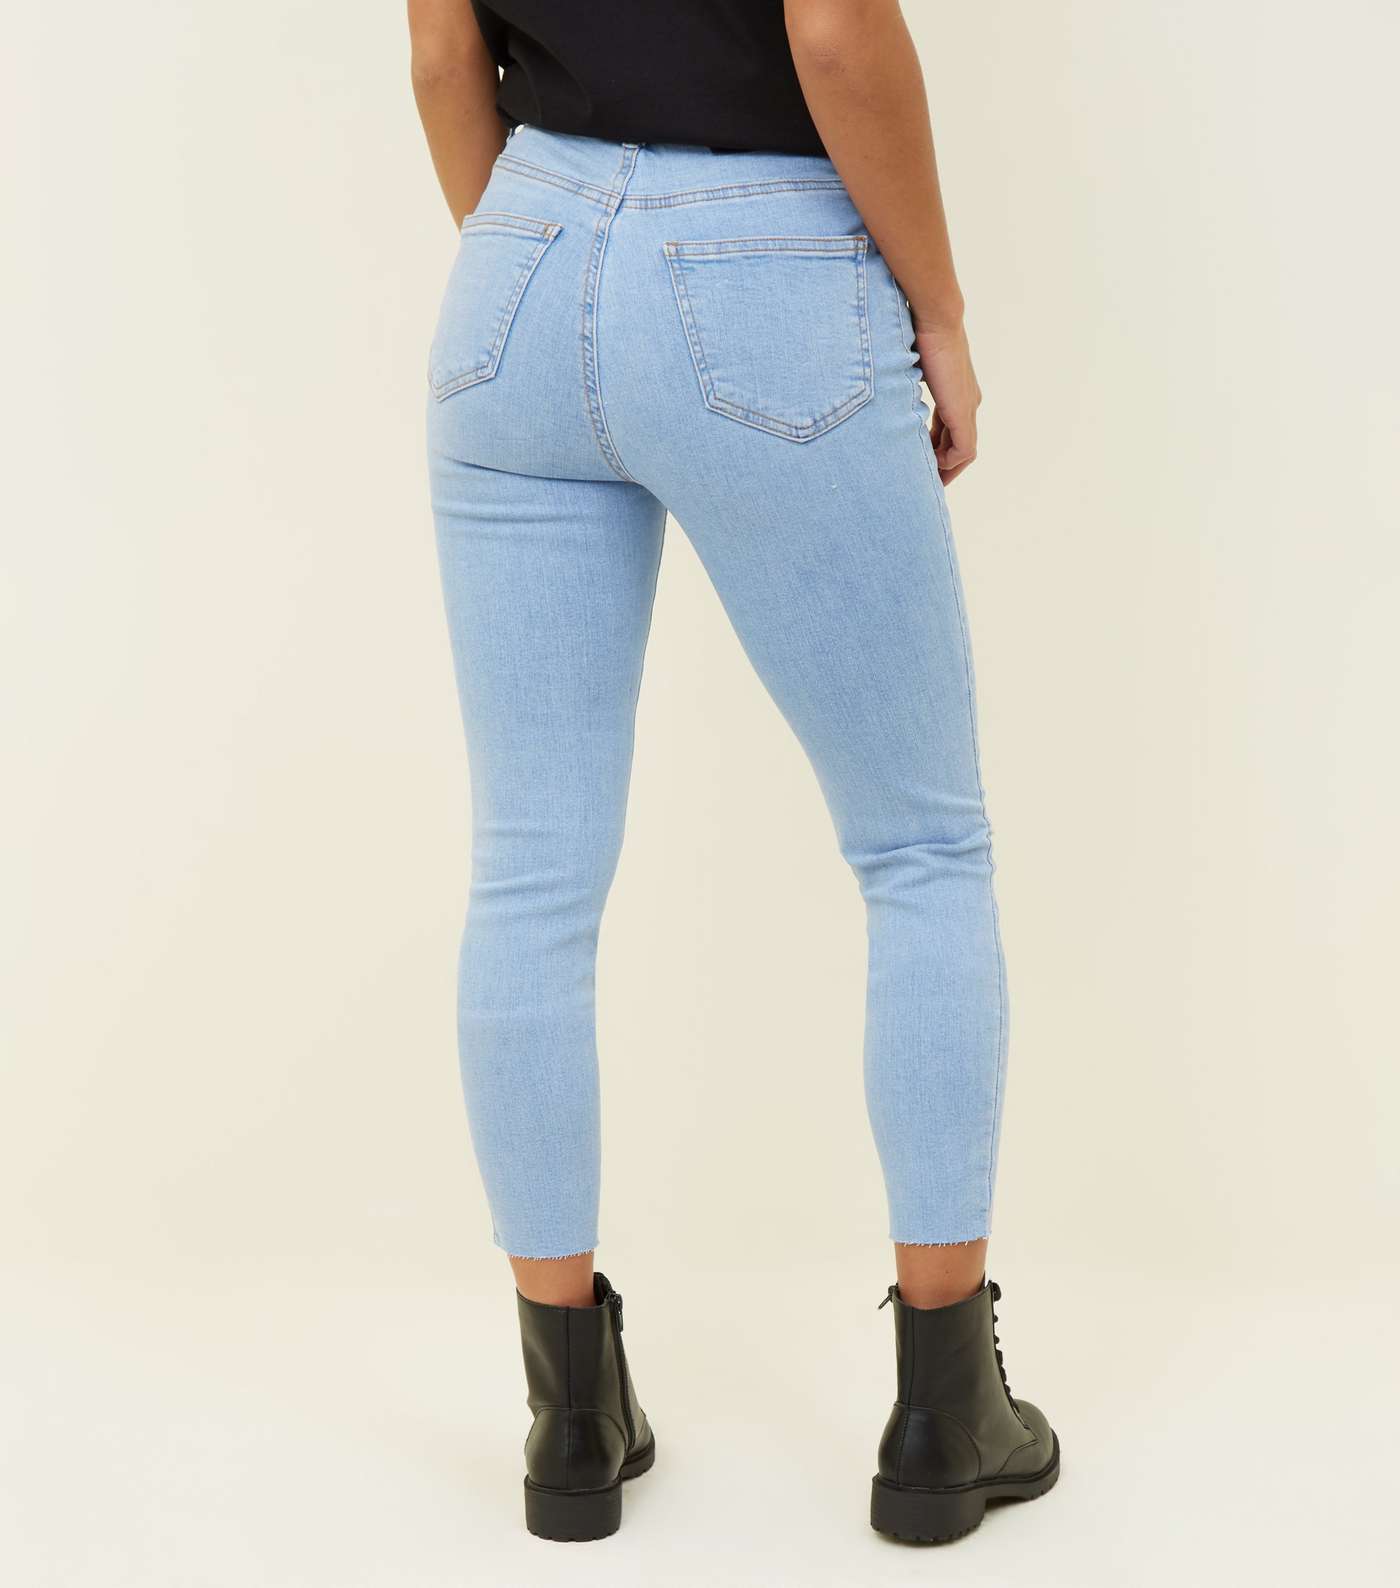 Petite Bright Blue Ripped Skinny Jeans  Image 3